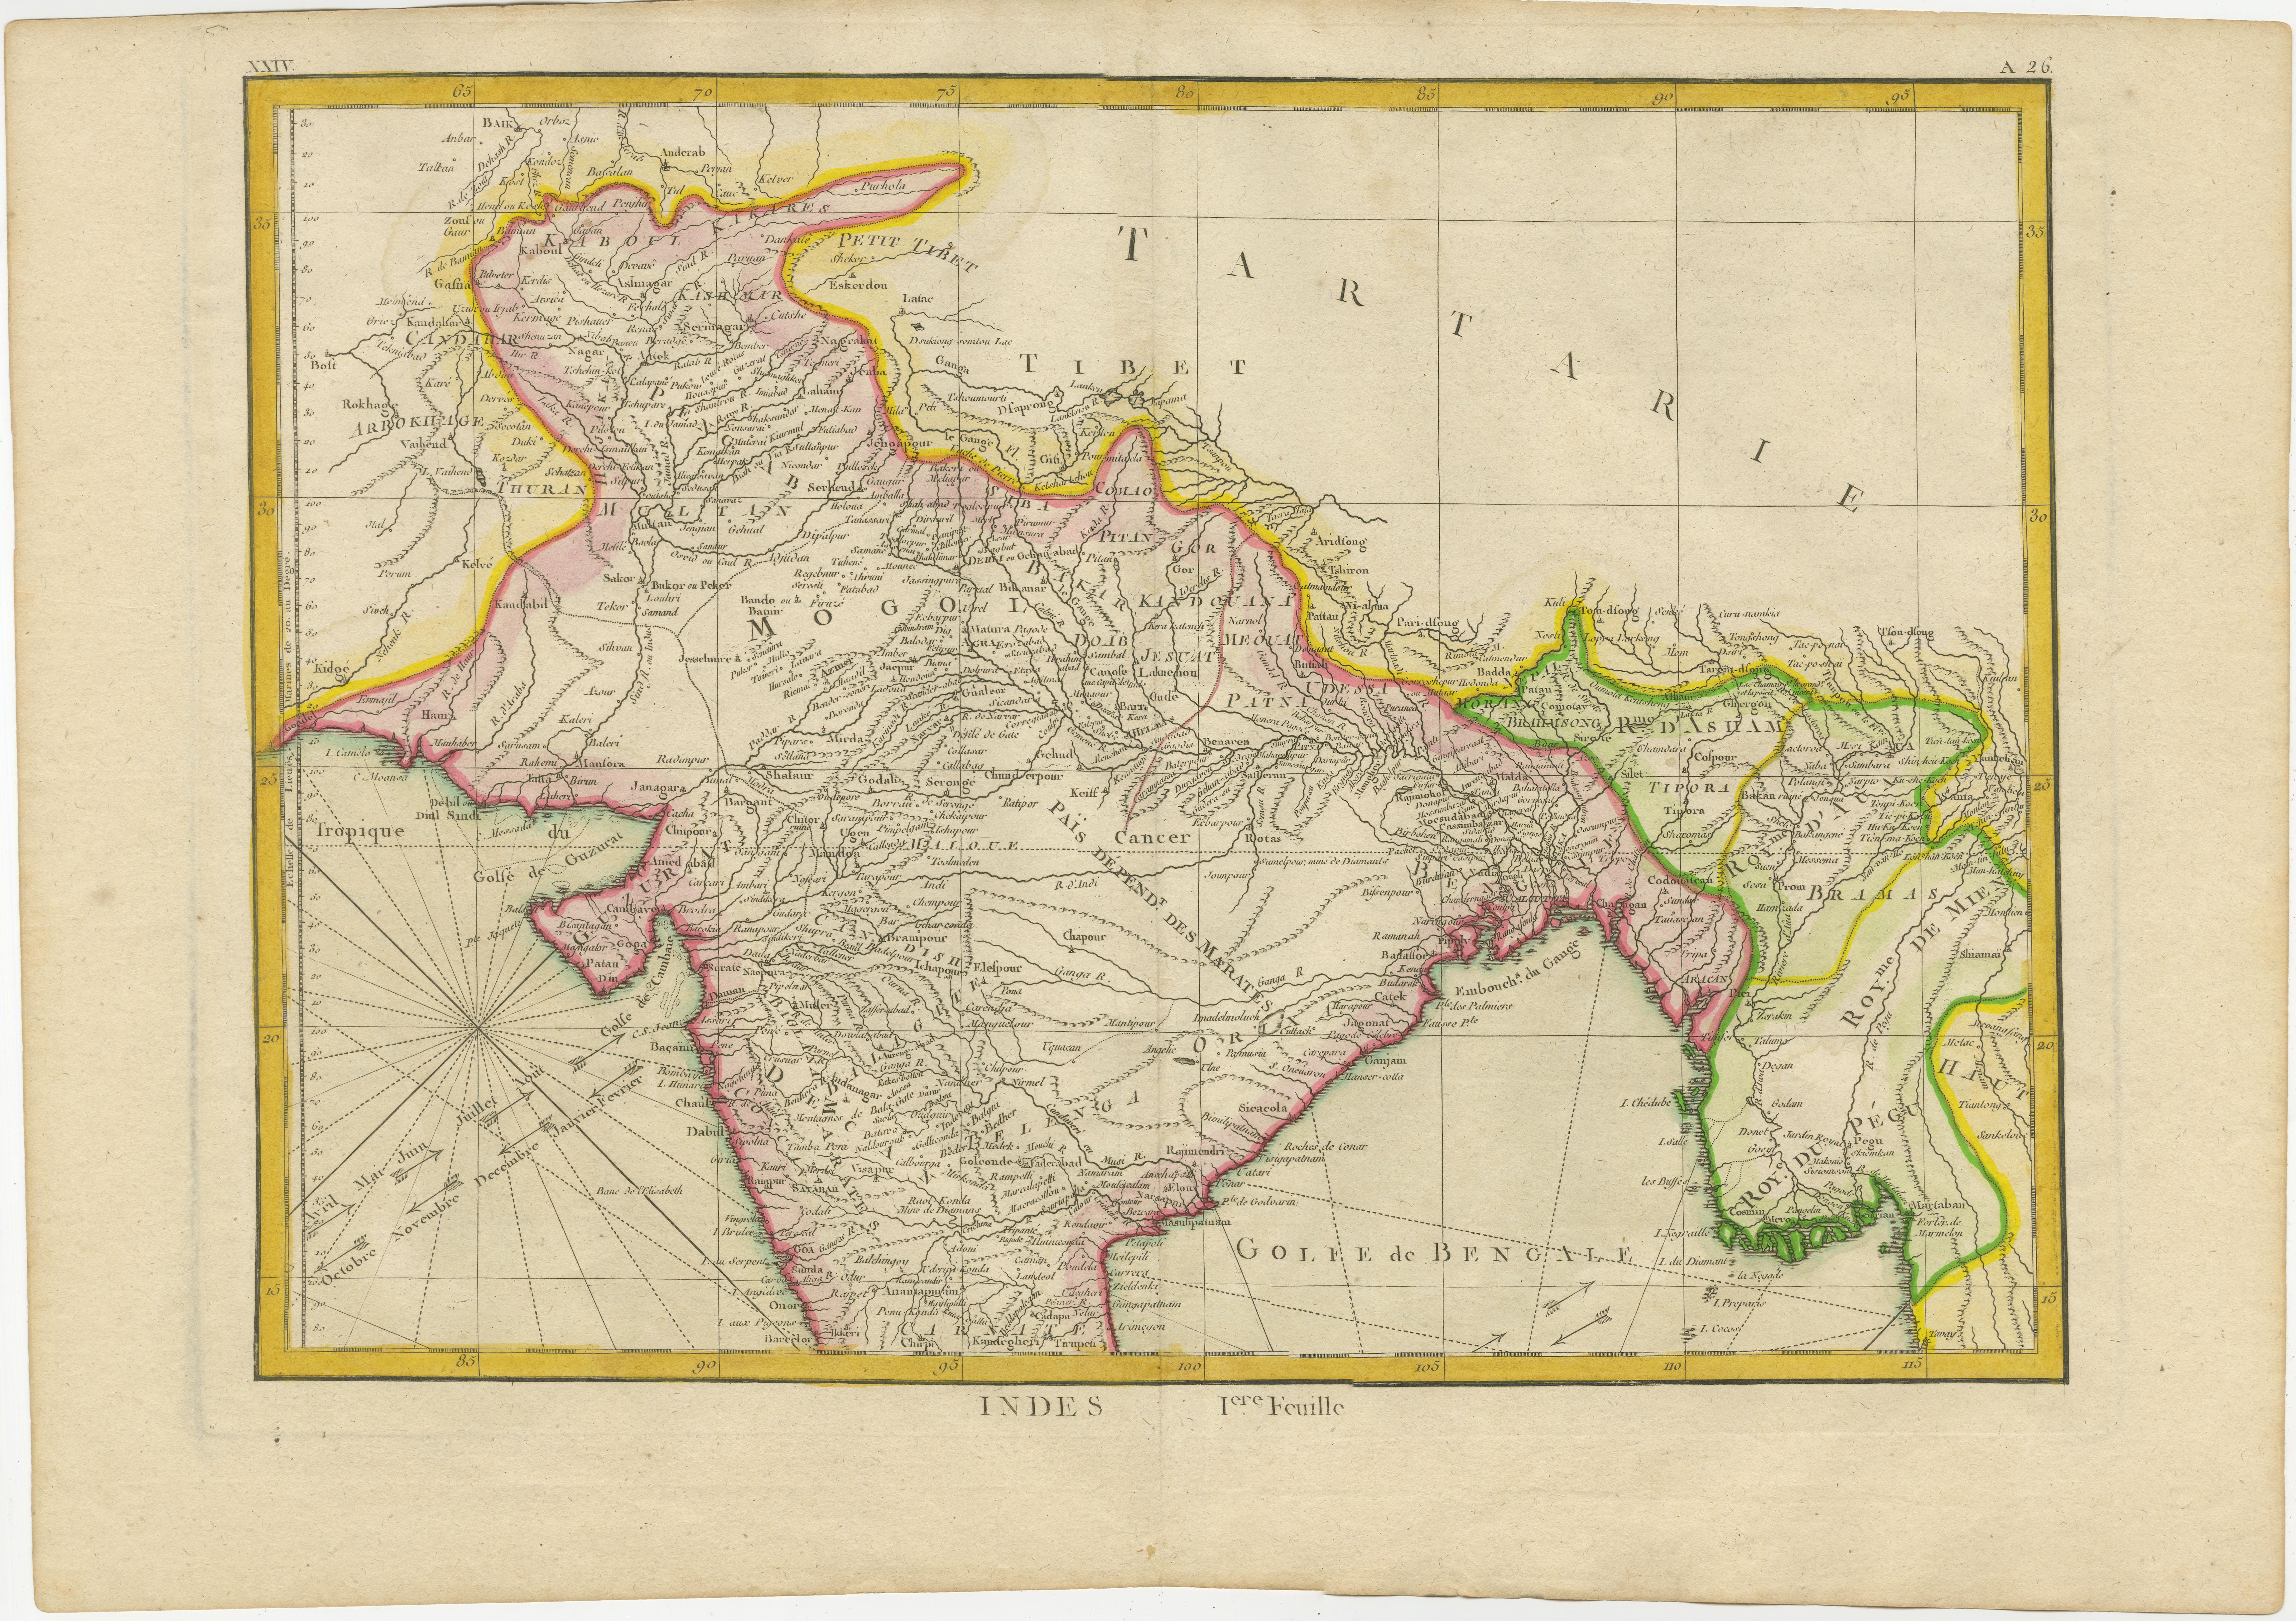 A voyage through history with an exquisite collection of Rigobert Bonne's 1770 maps, as featured in the coveted Atlas Moderne circa 1770. Each map, a cartographic treasure, captures the intricate dance of land and sea across the Indian subcontinent